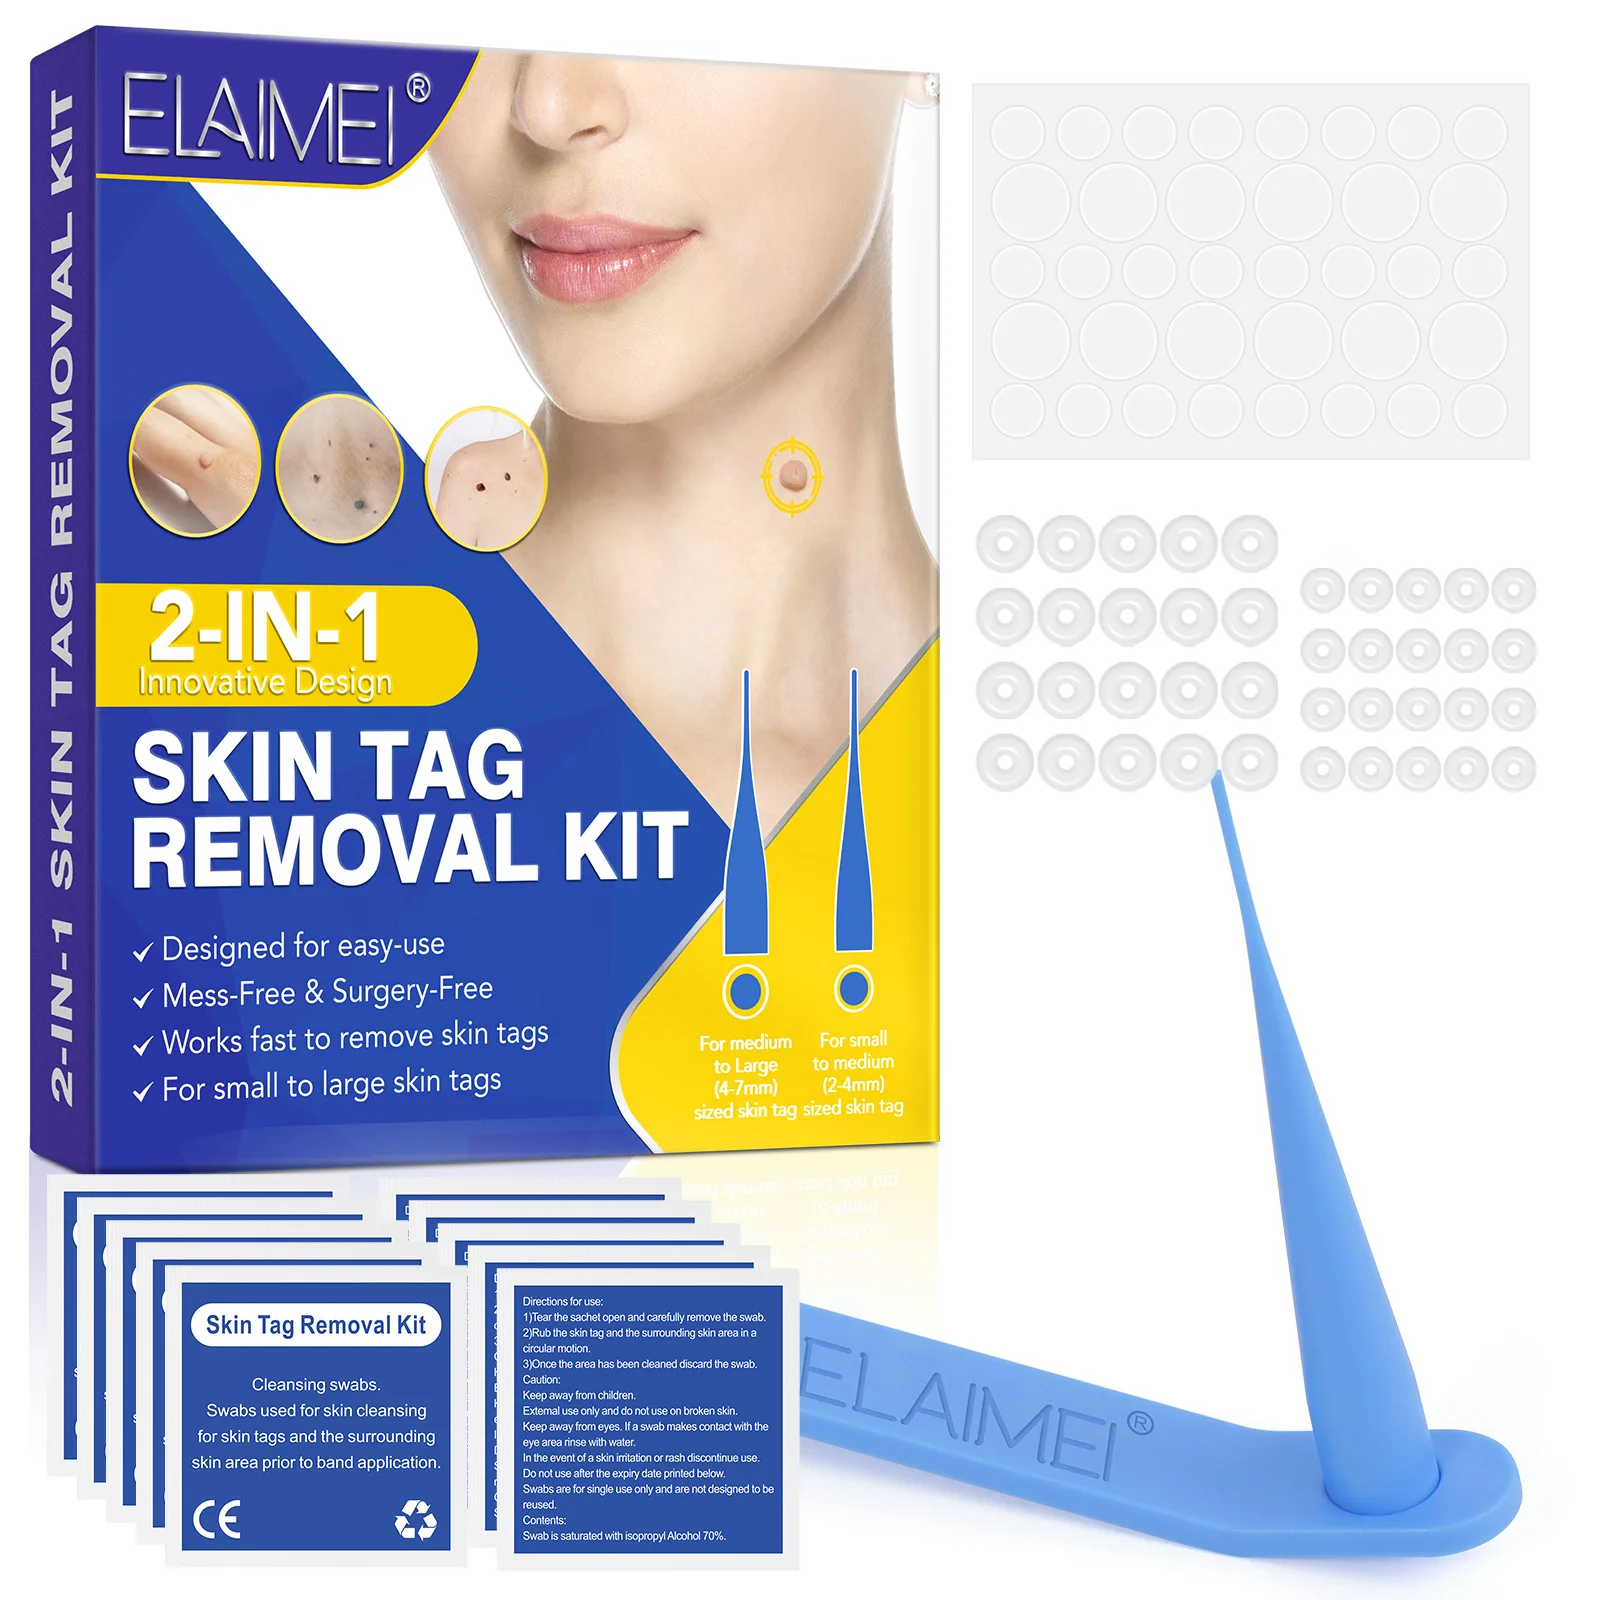 2-IN-1 Wart Removal Kit Wart Removal Sticker Fast Removal Kit Meat Polka Dots Warts Acne Flesh Mole Face Pot Skin Tag Care Tools